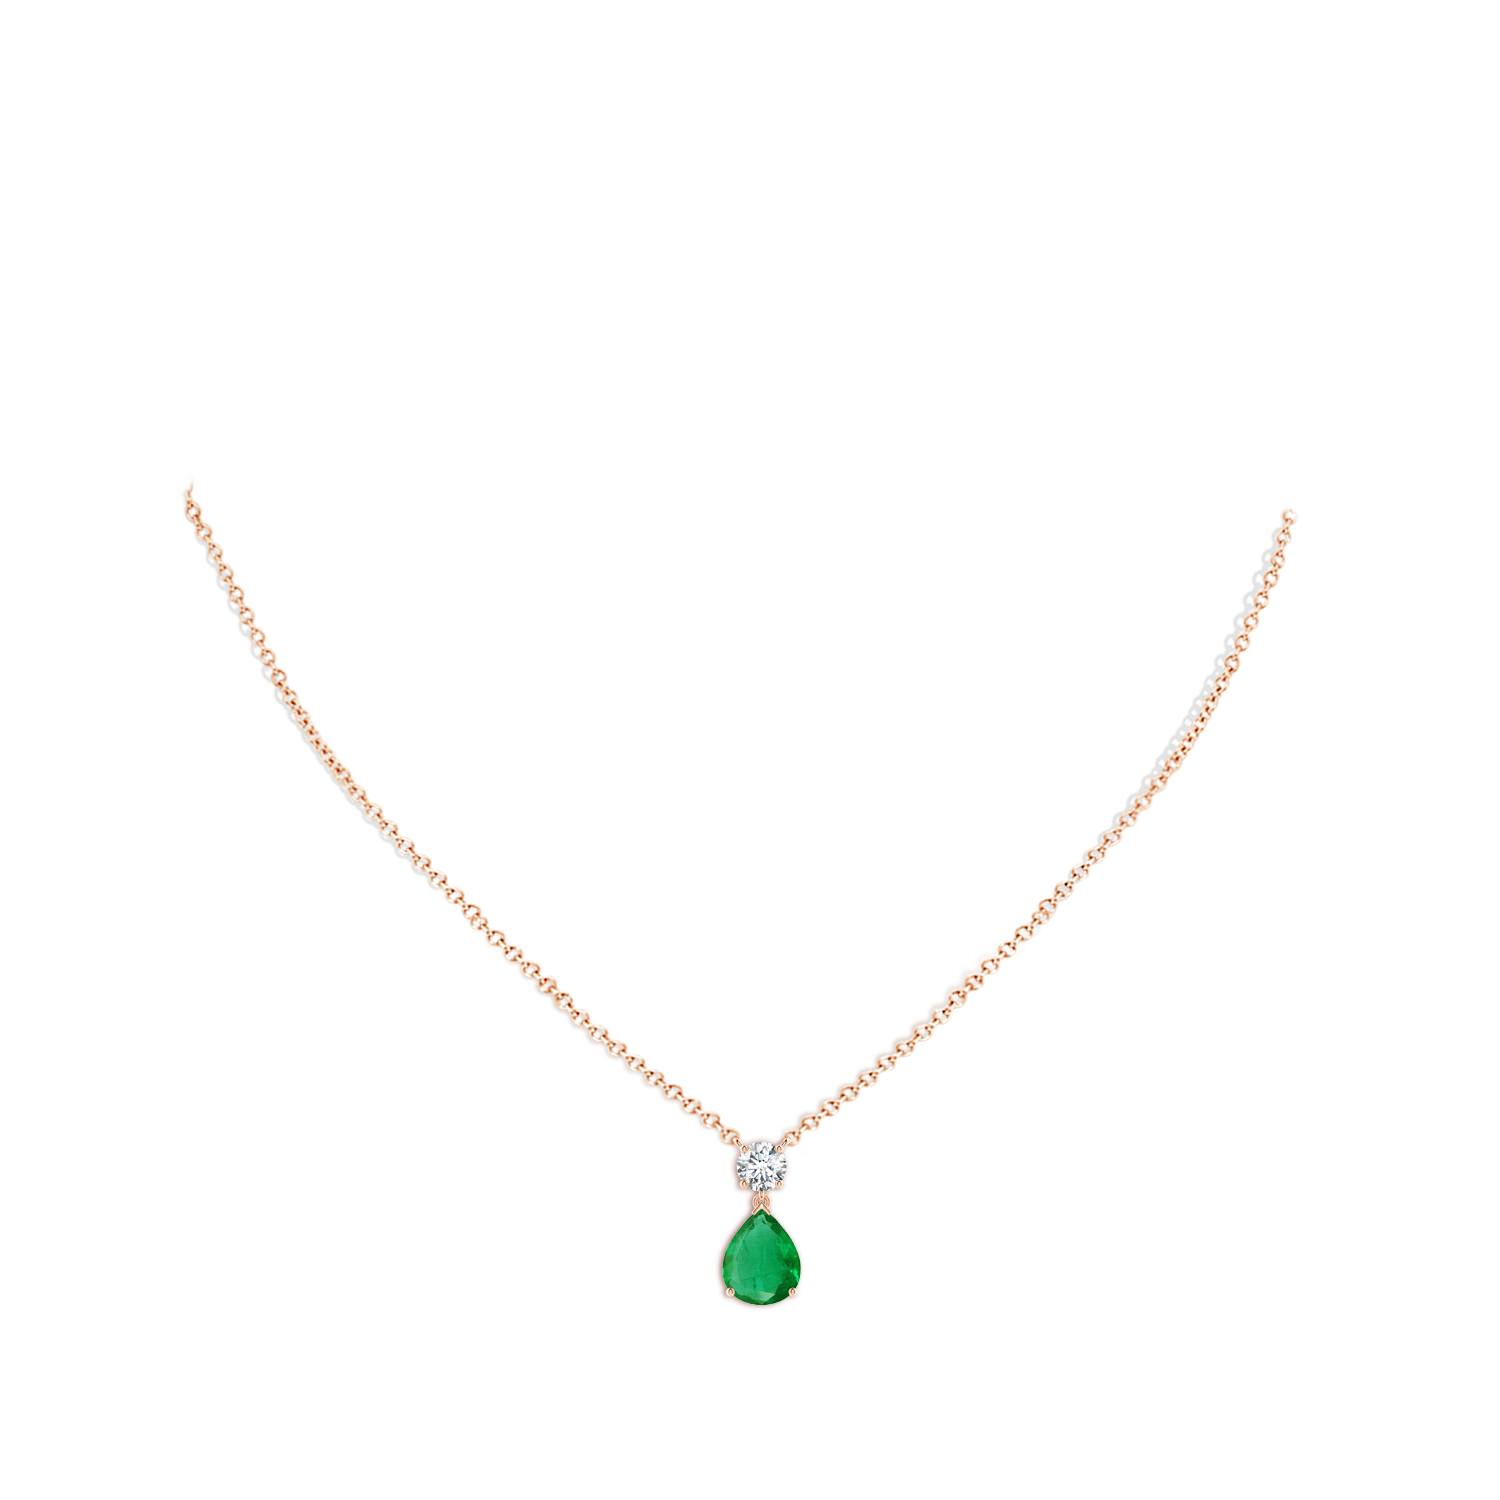 AA - Emerald / 3 CT / 18 KT Rose Gold